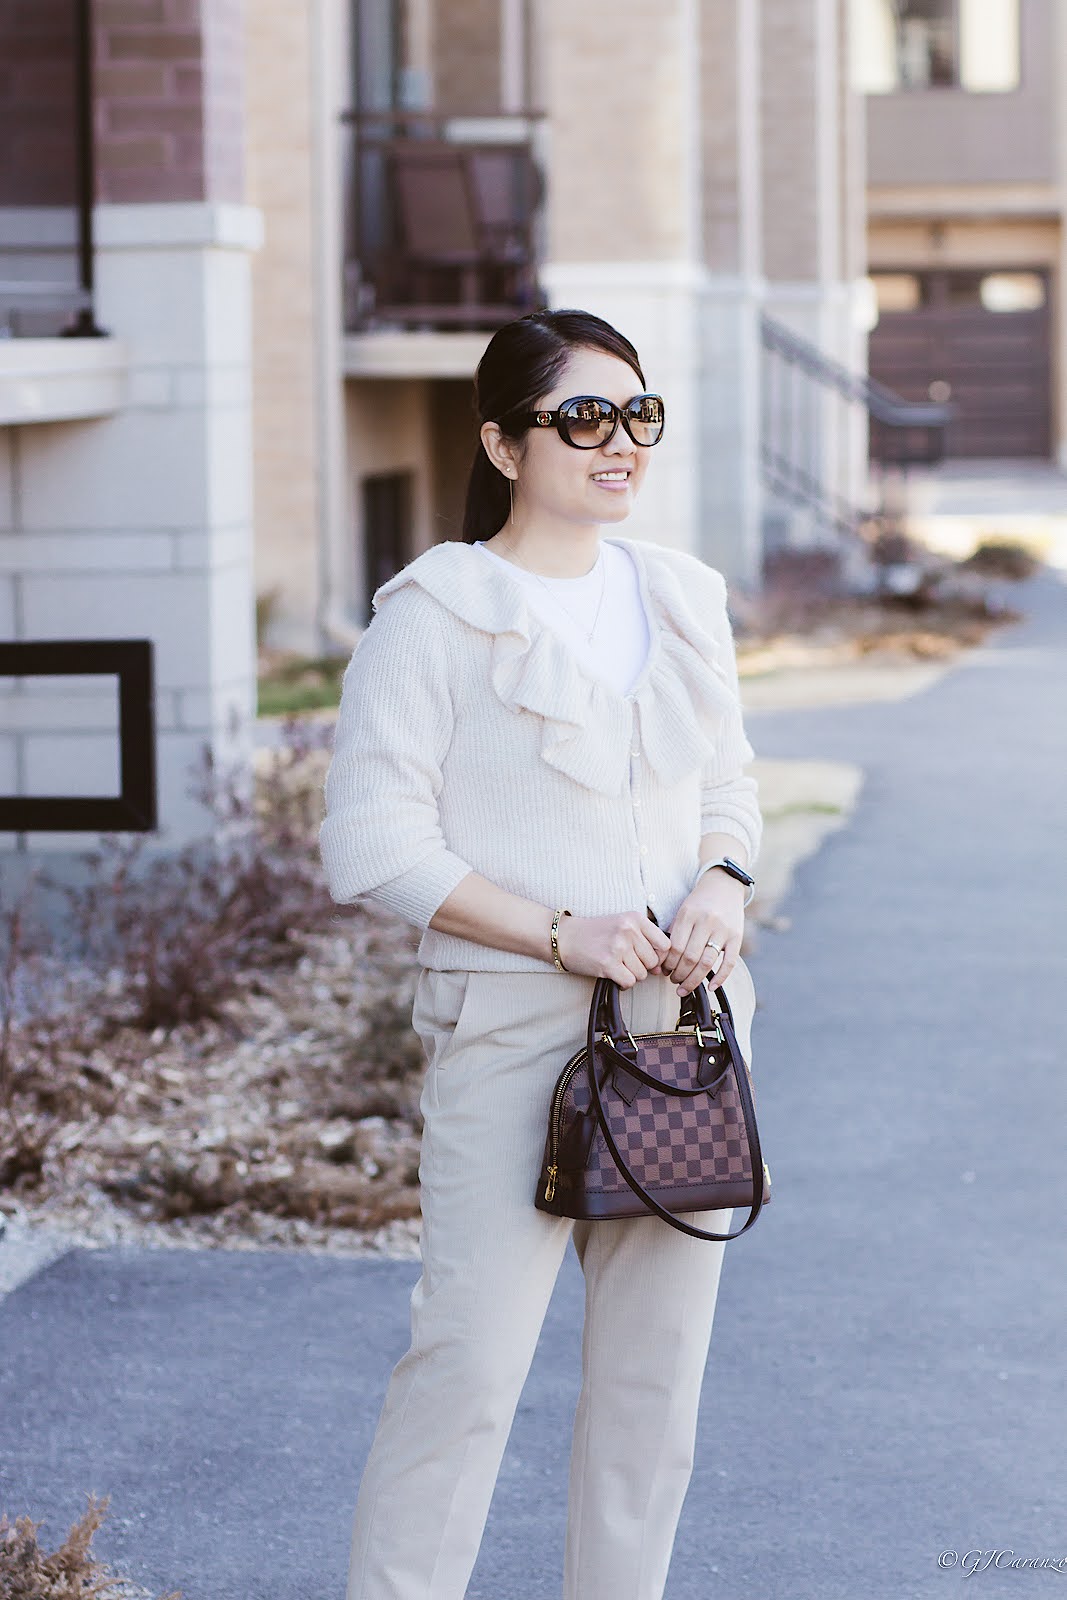 H&M Knit Cardigan_Banana Republic Pants_Adidas Stan Smith_Louis Vuitton AlmaBB_Gucci Sunglasses_Spring Outfit_Mom Style_Petite Fashion_Neutral Outfit